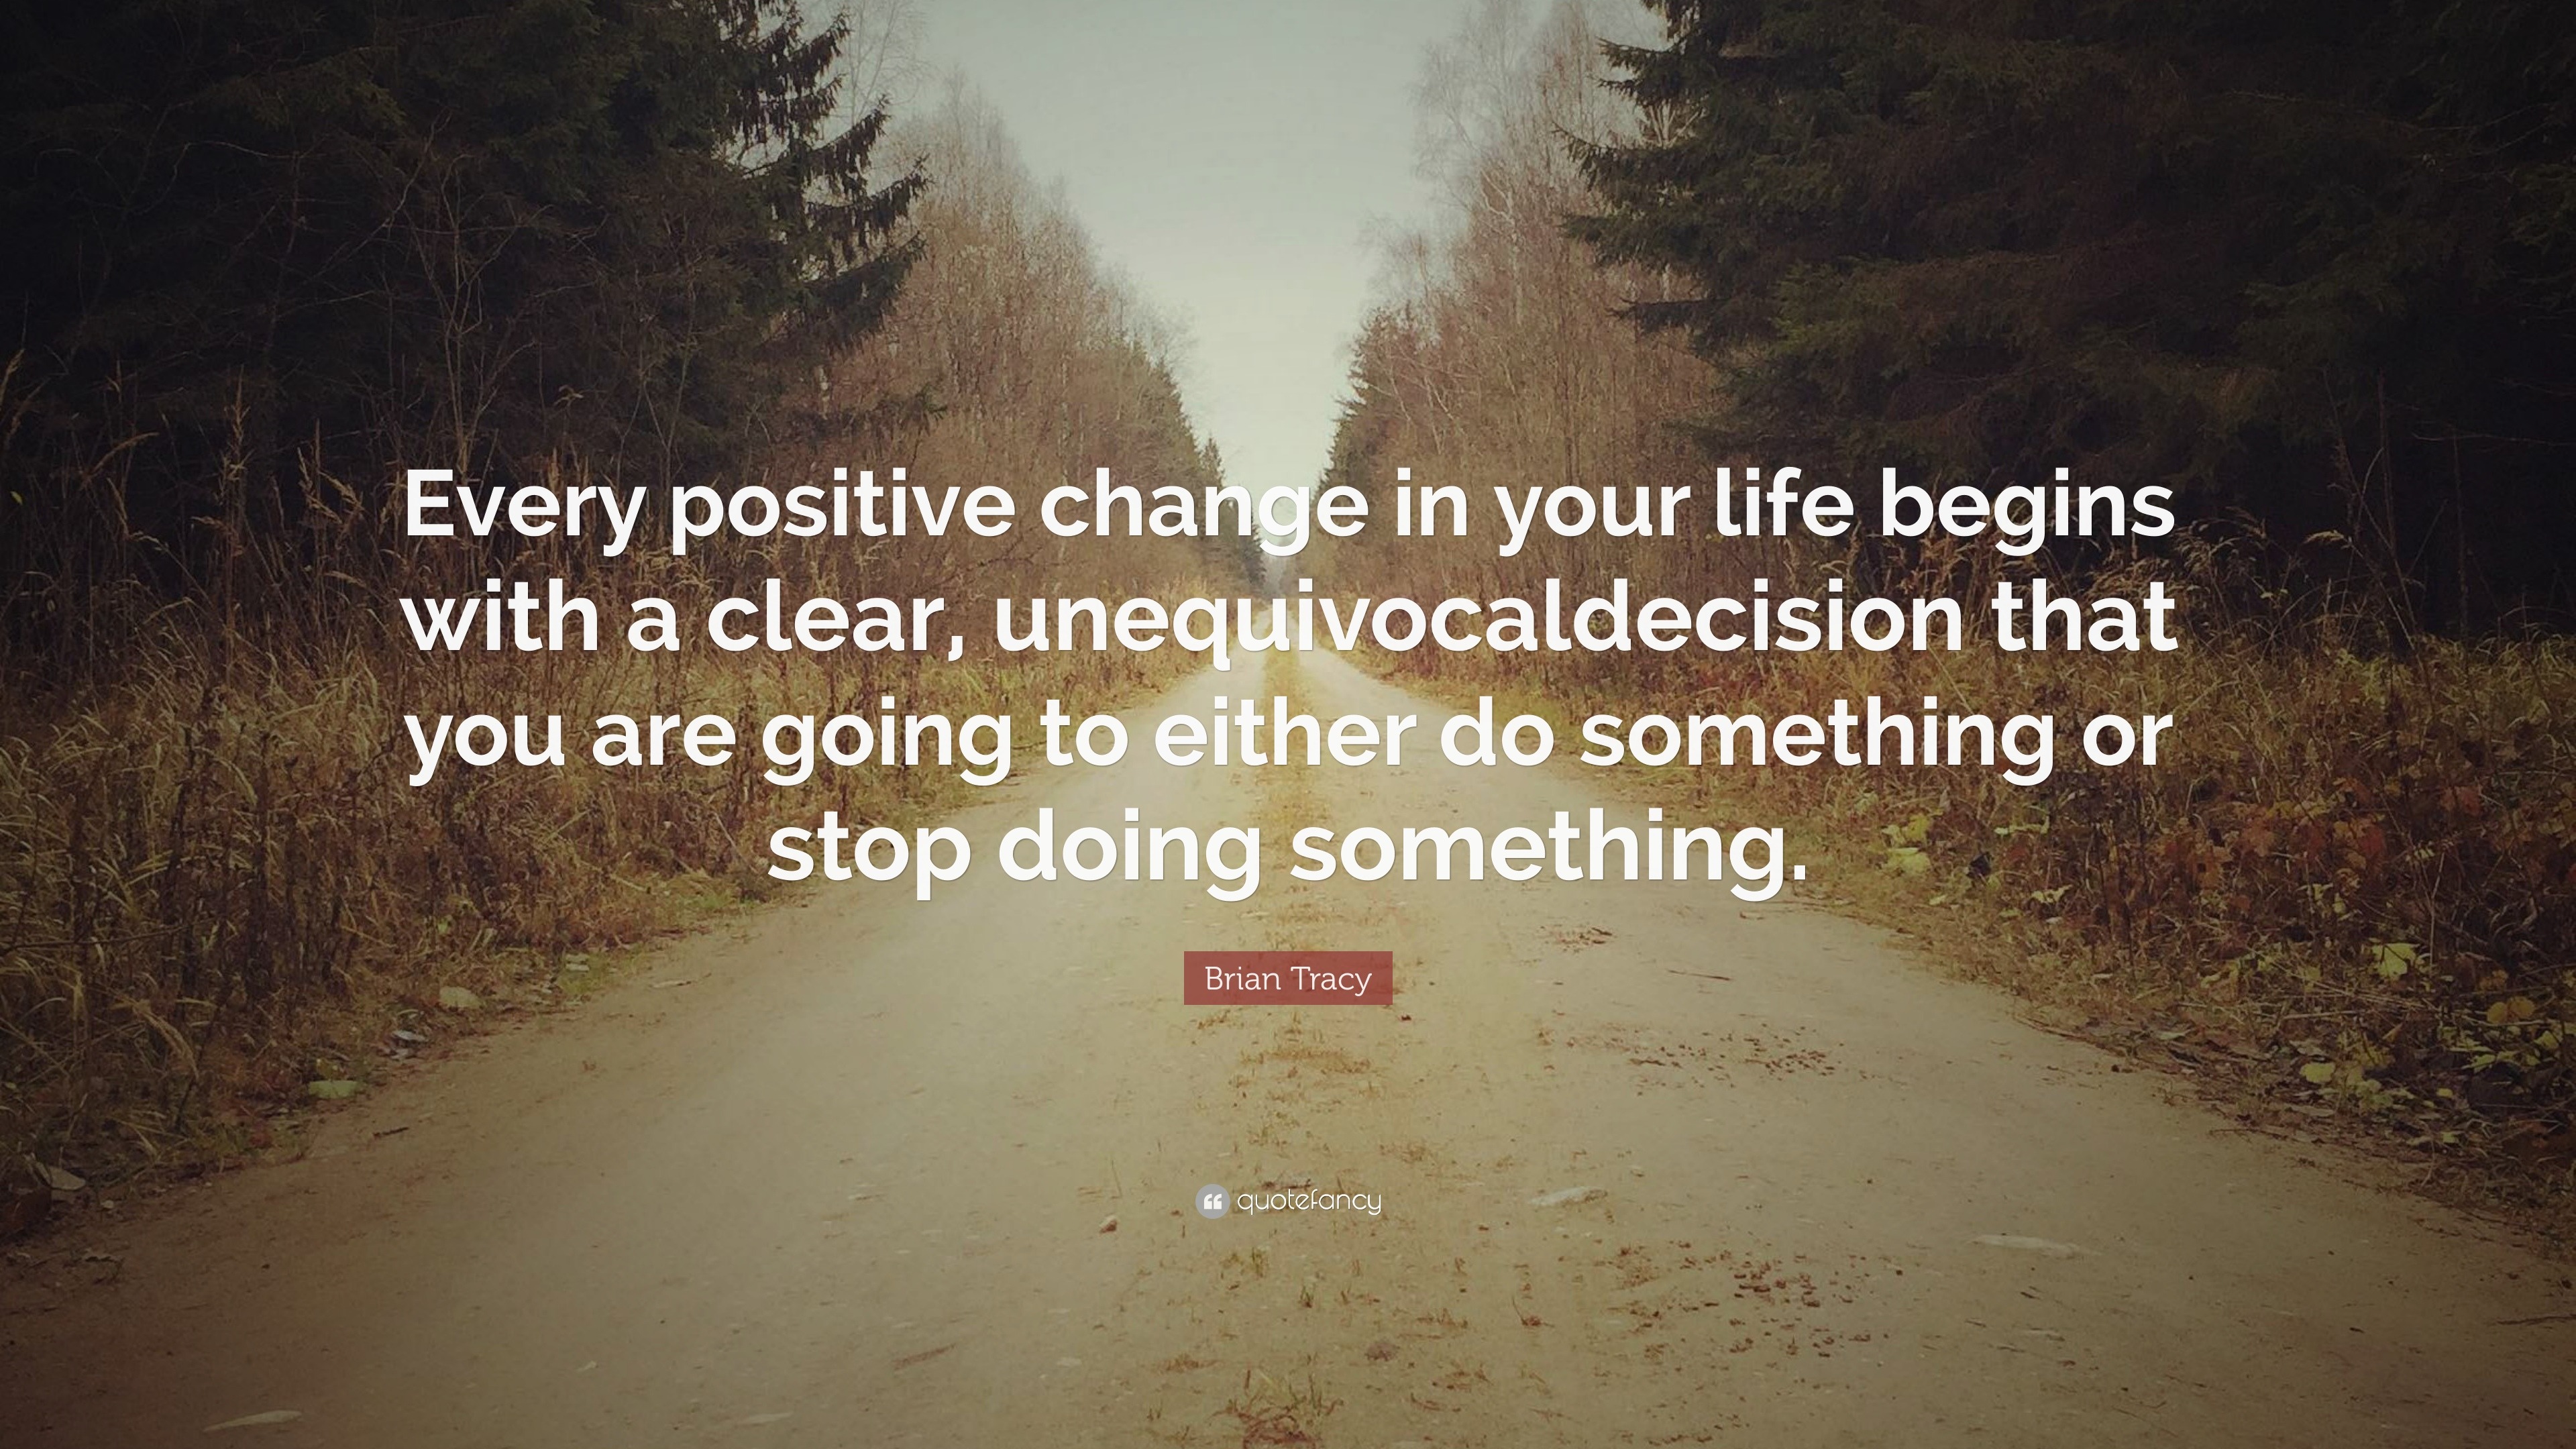 Brian Tracy Quote “Every positive change in your life begins with a